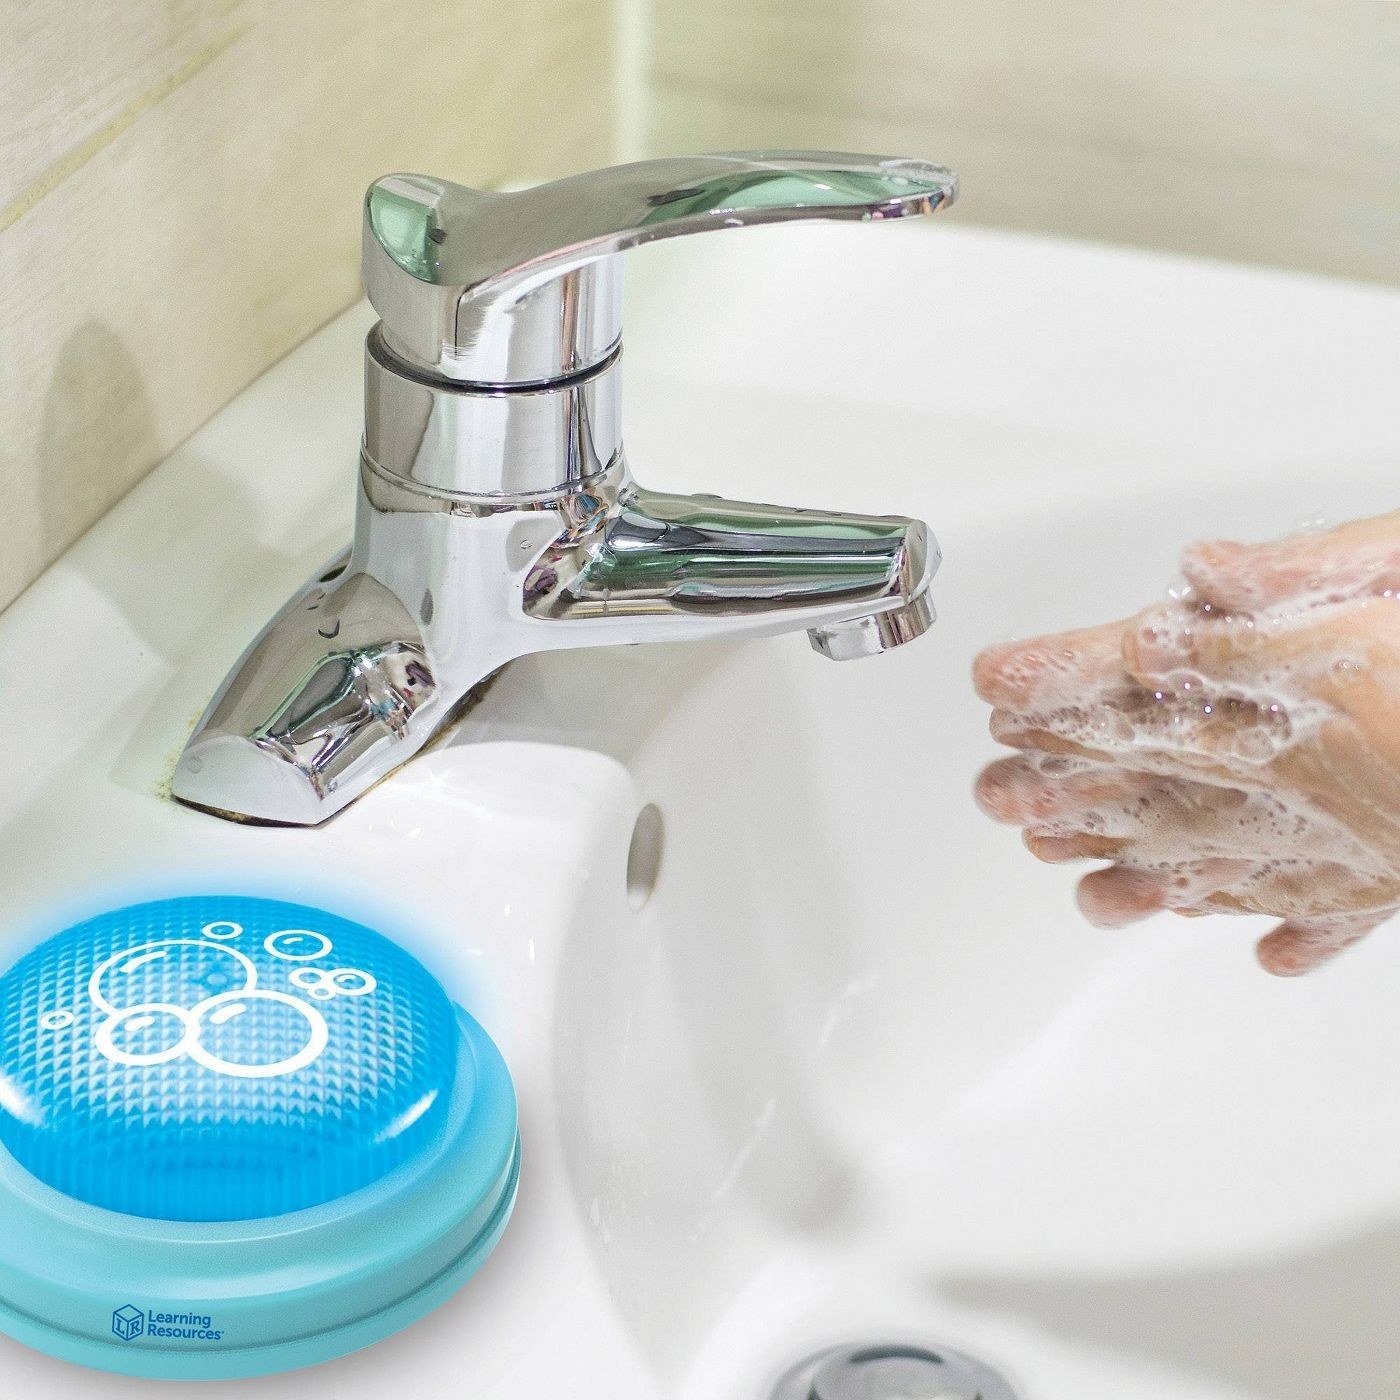 Hand washing timer next to sink with person washing their hands